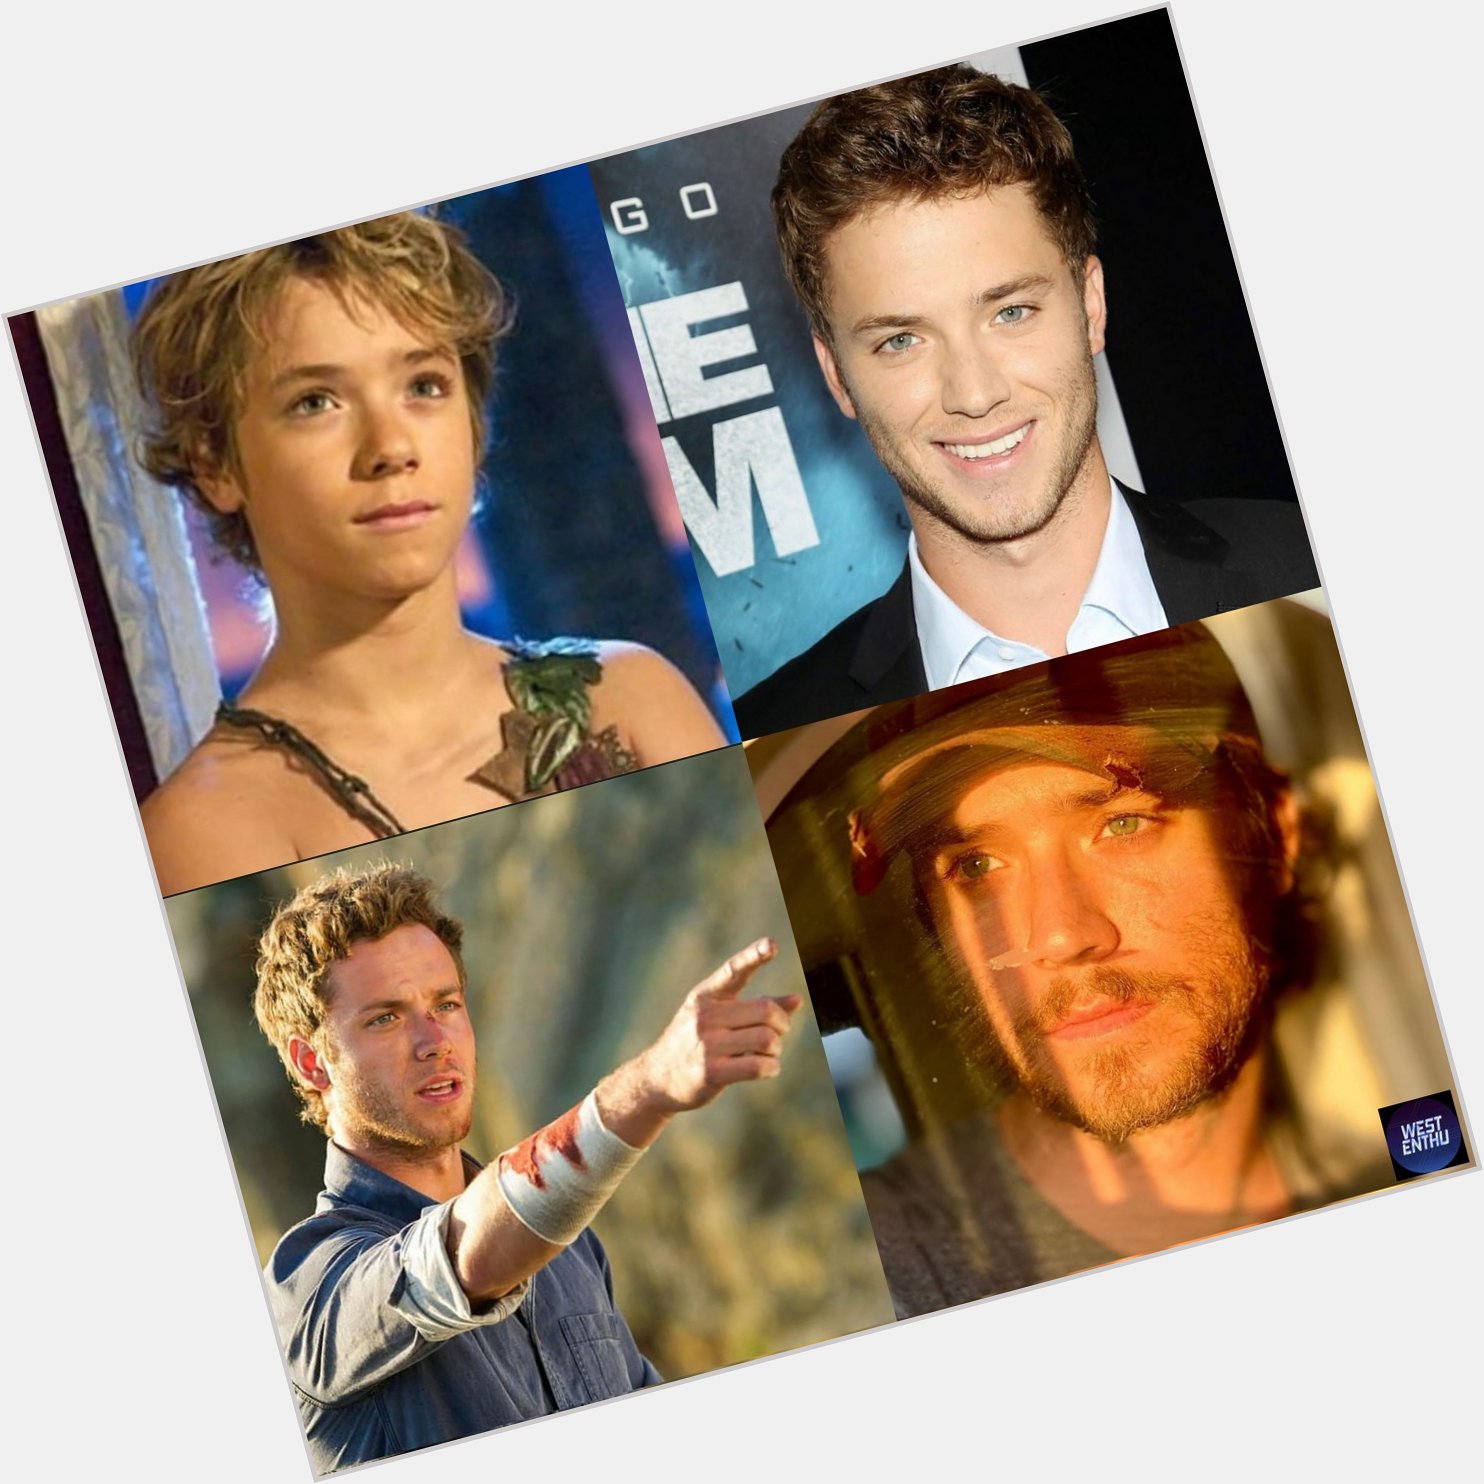 EVERYBODY SAY HAPPY BIRTHDAY JEREMY SUMPTER  my first ever wst celebrity love!         